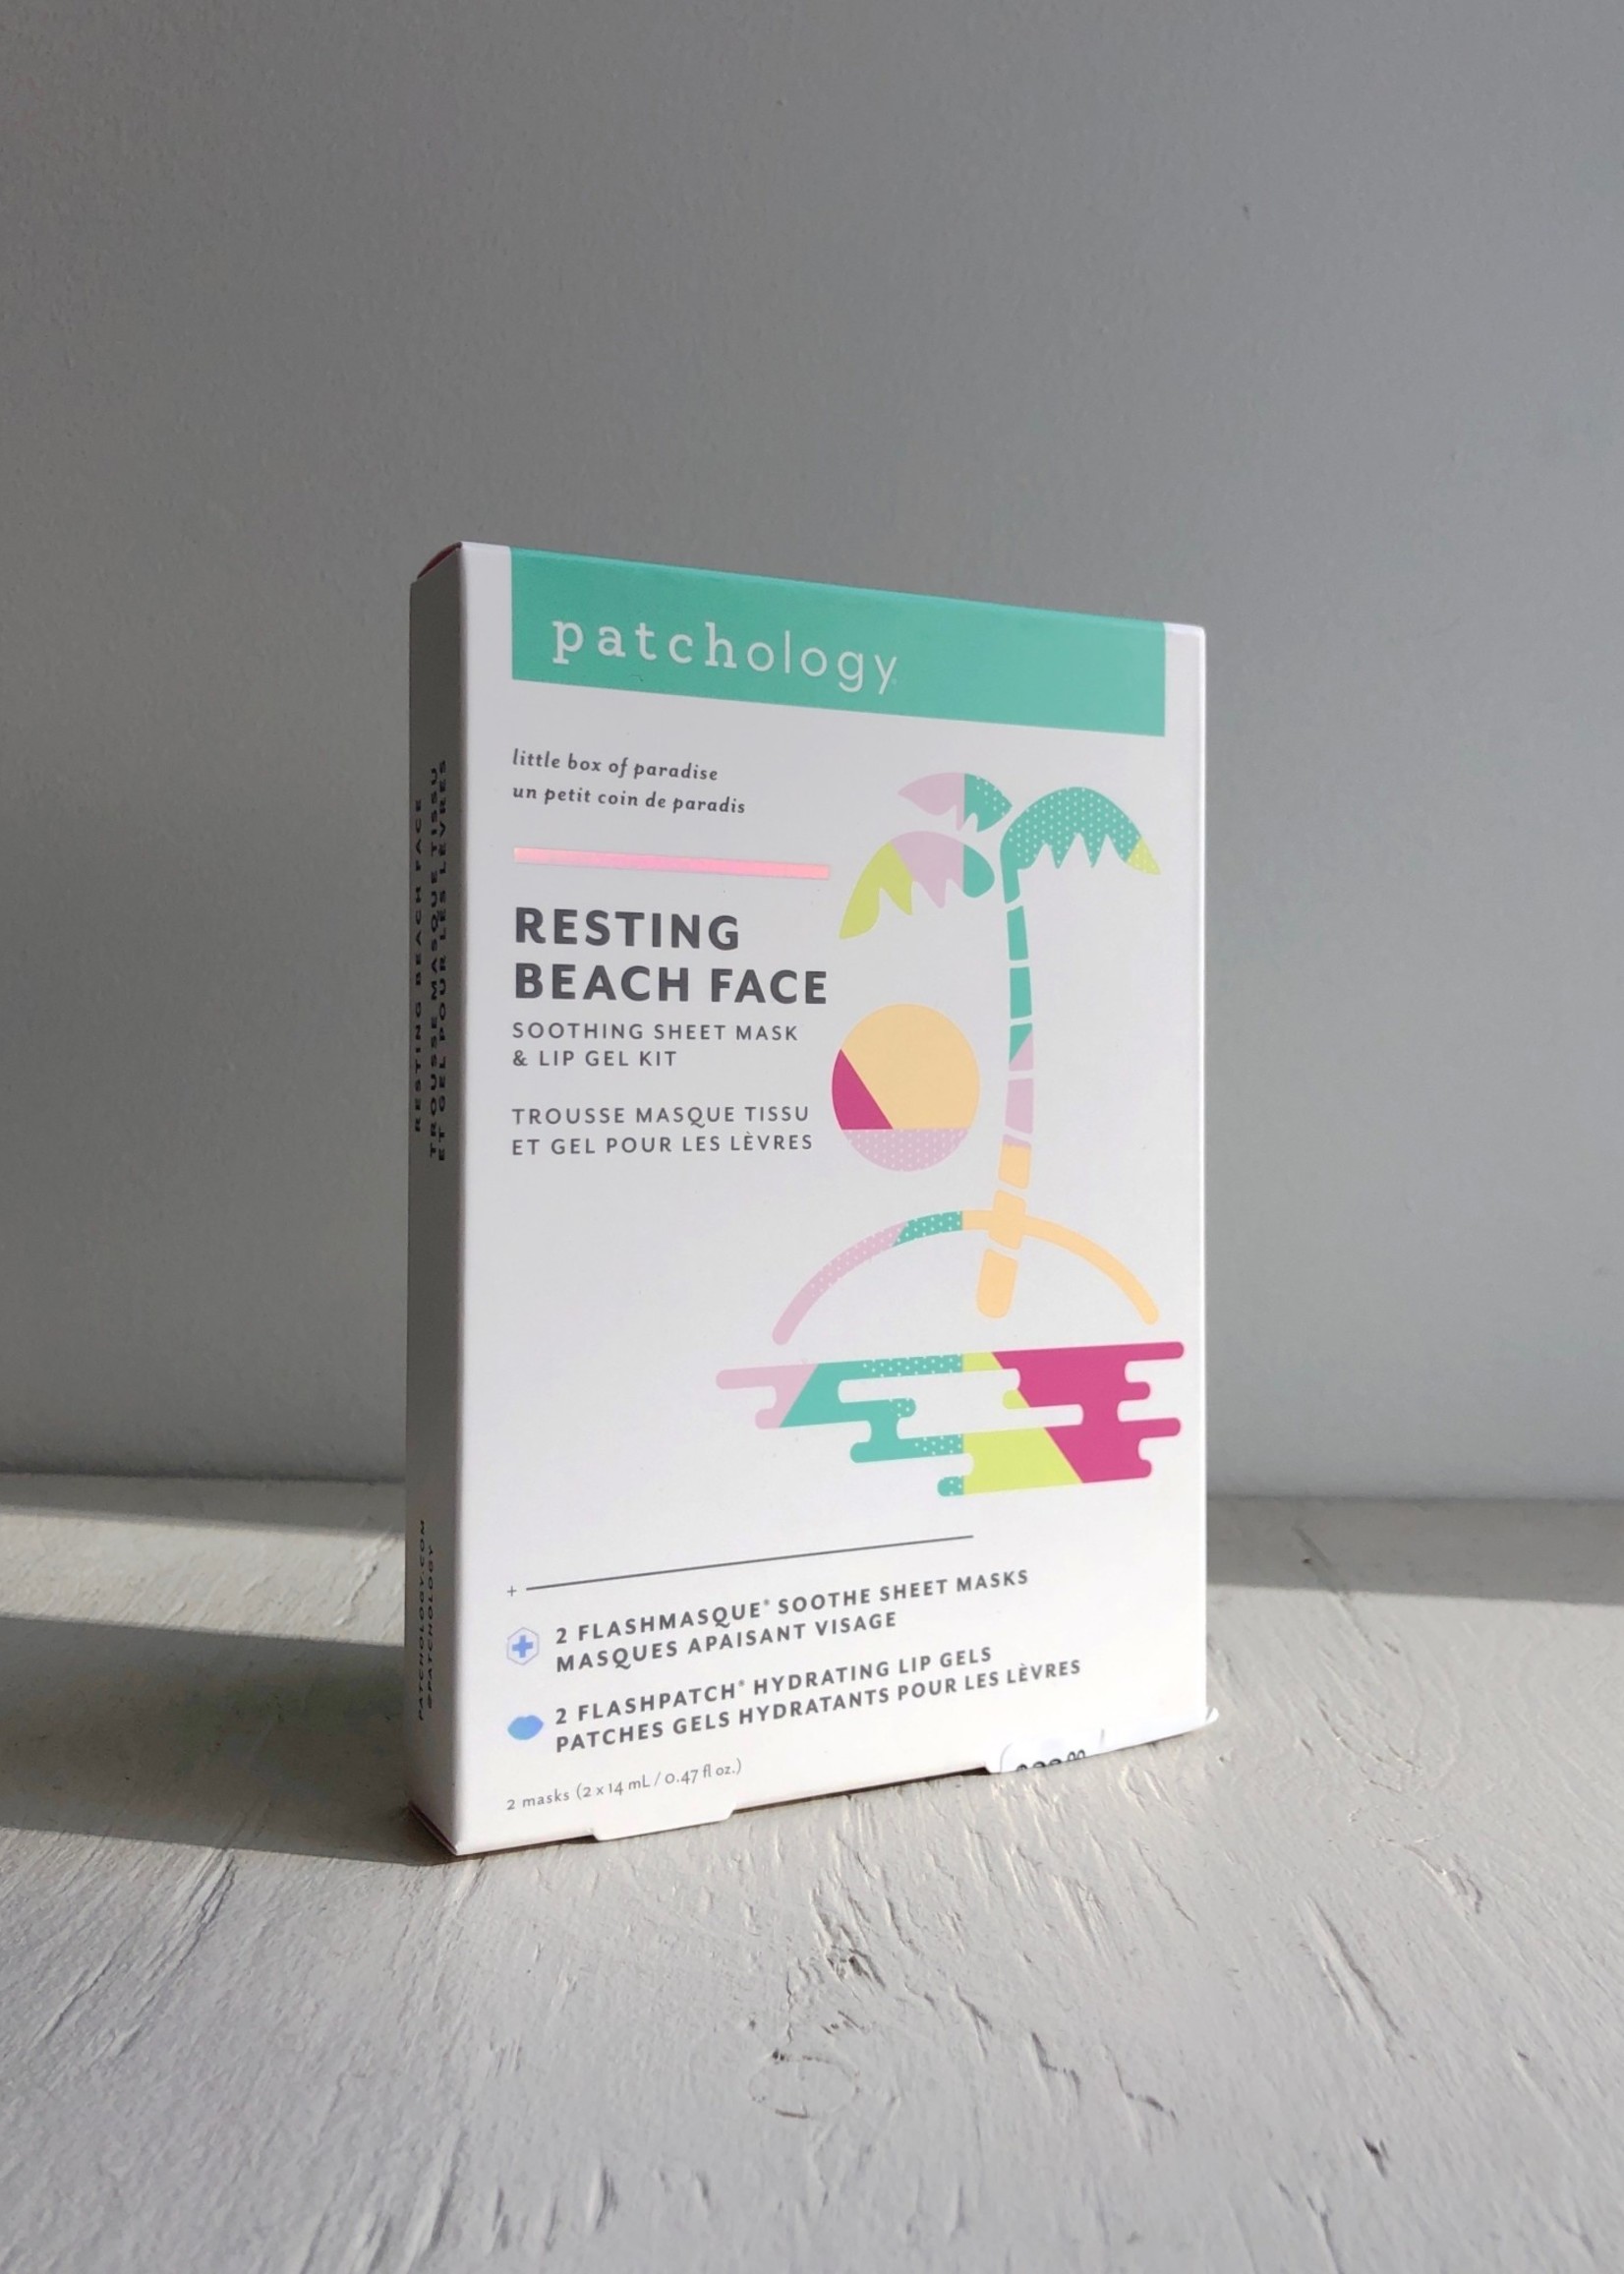 Patchology "Resting Beach Face" Mask and Gels Pack by Patchology